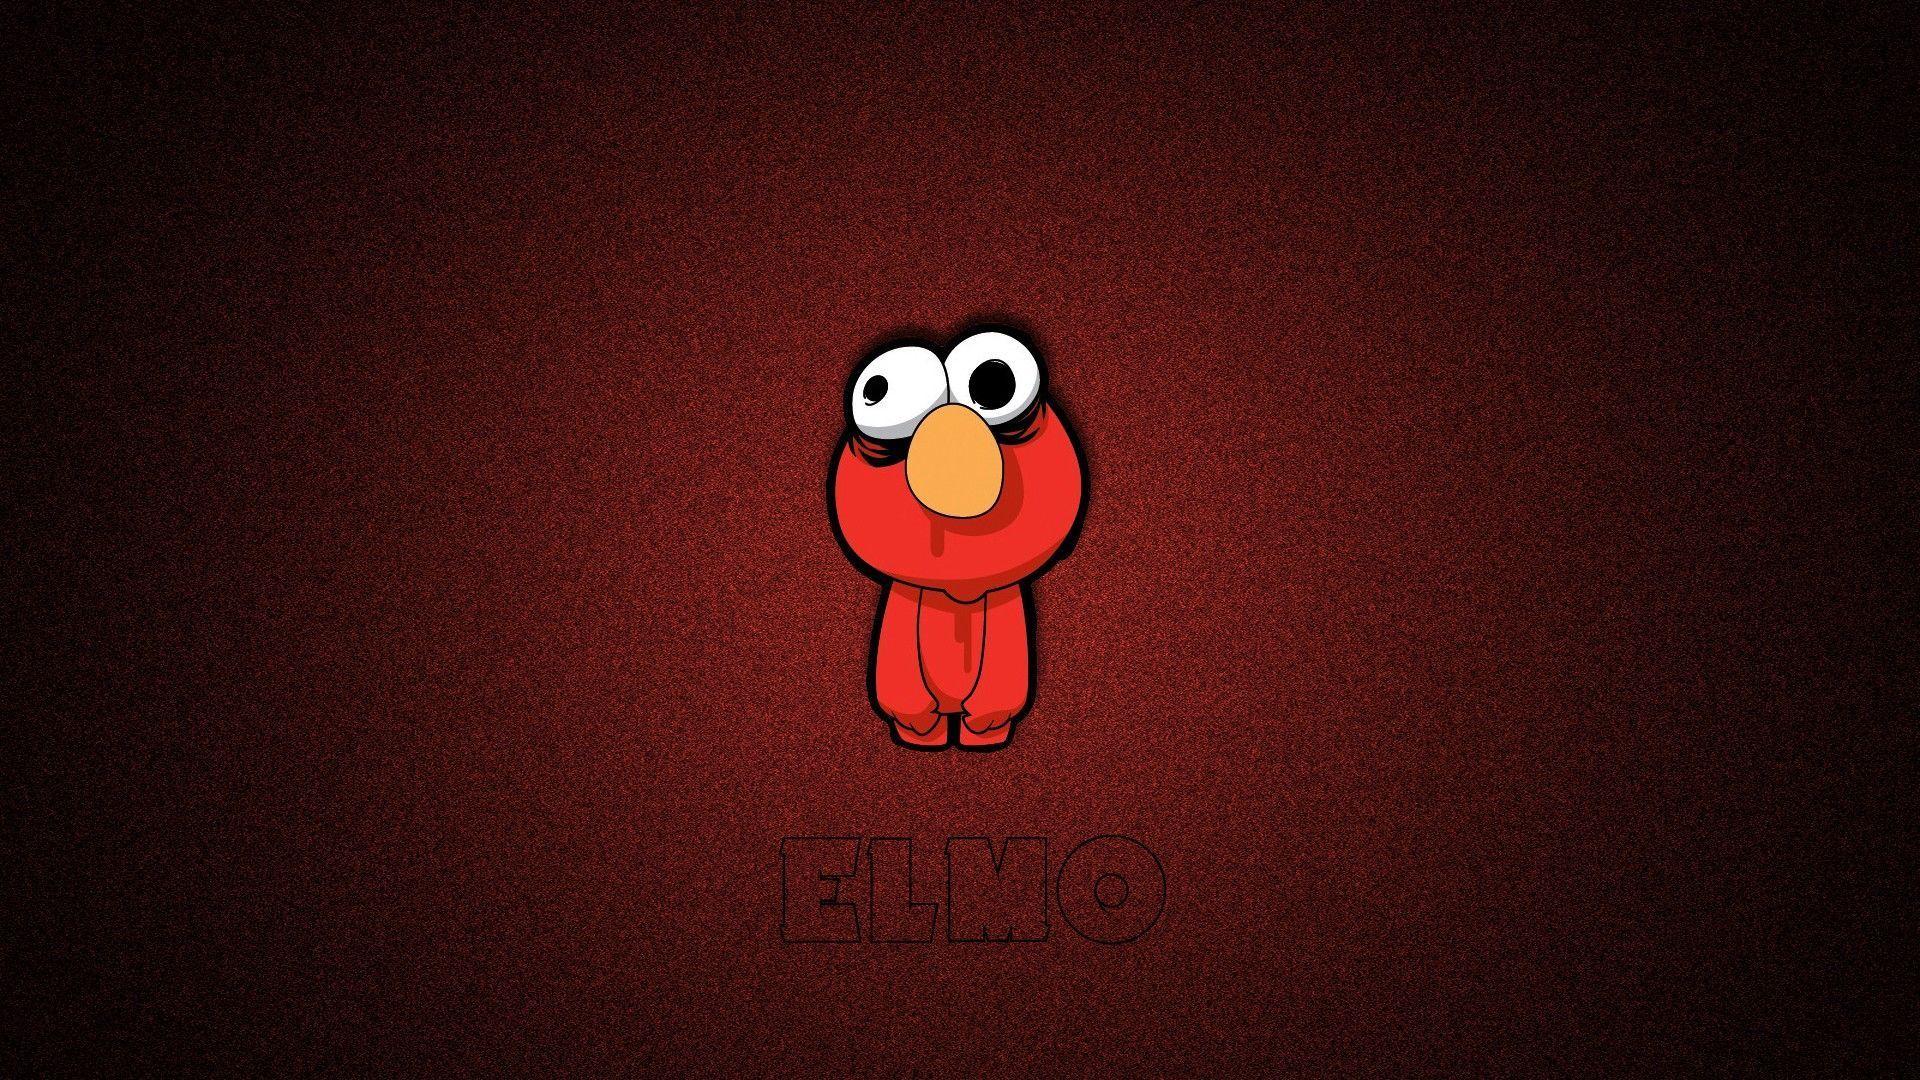 Download free elmo wallpaper for your mobile phone most. HD